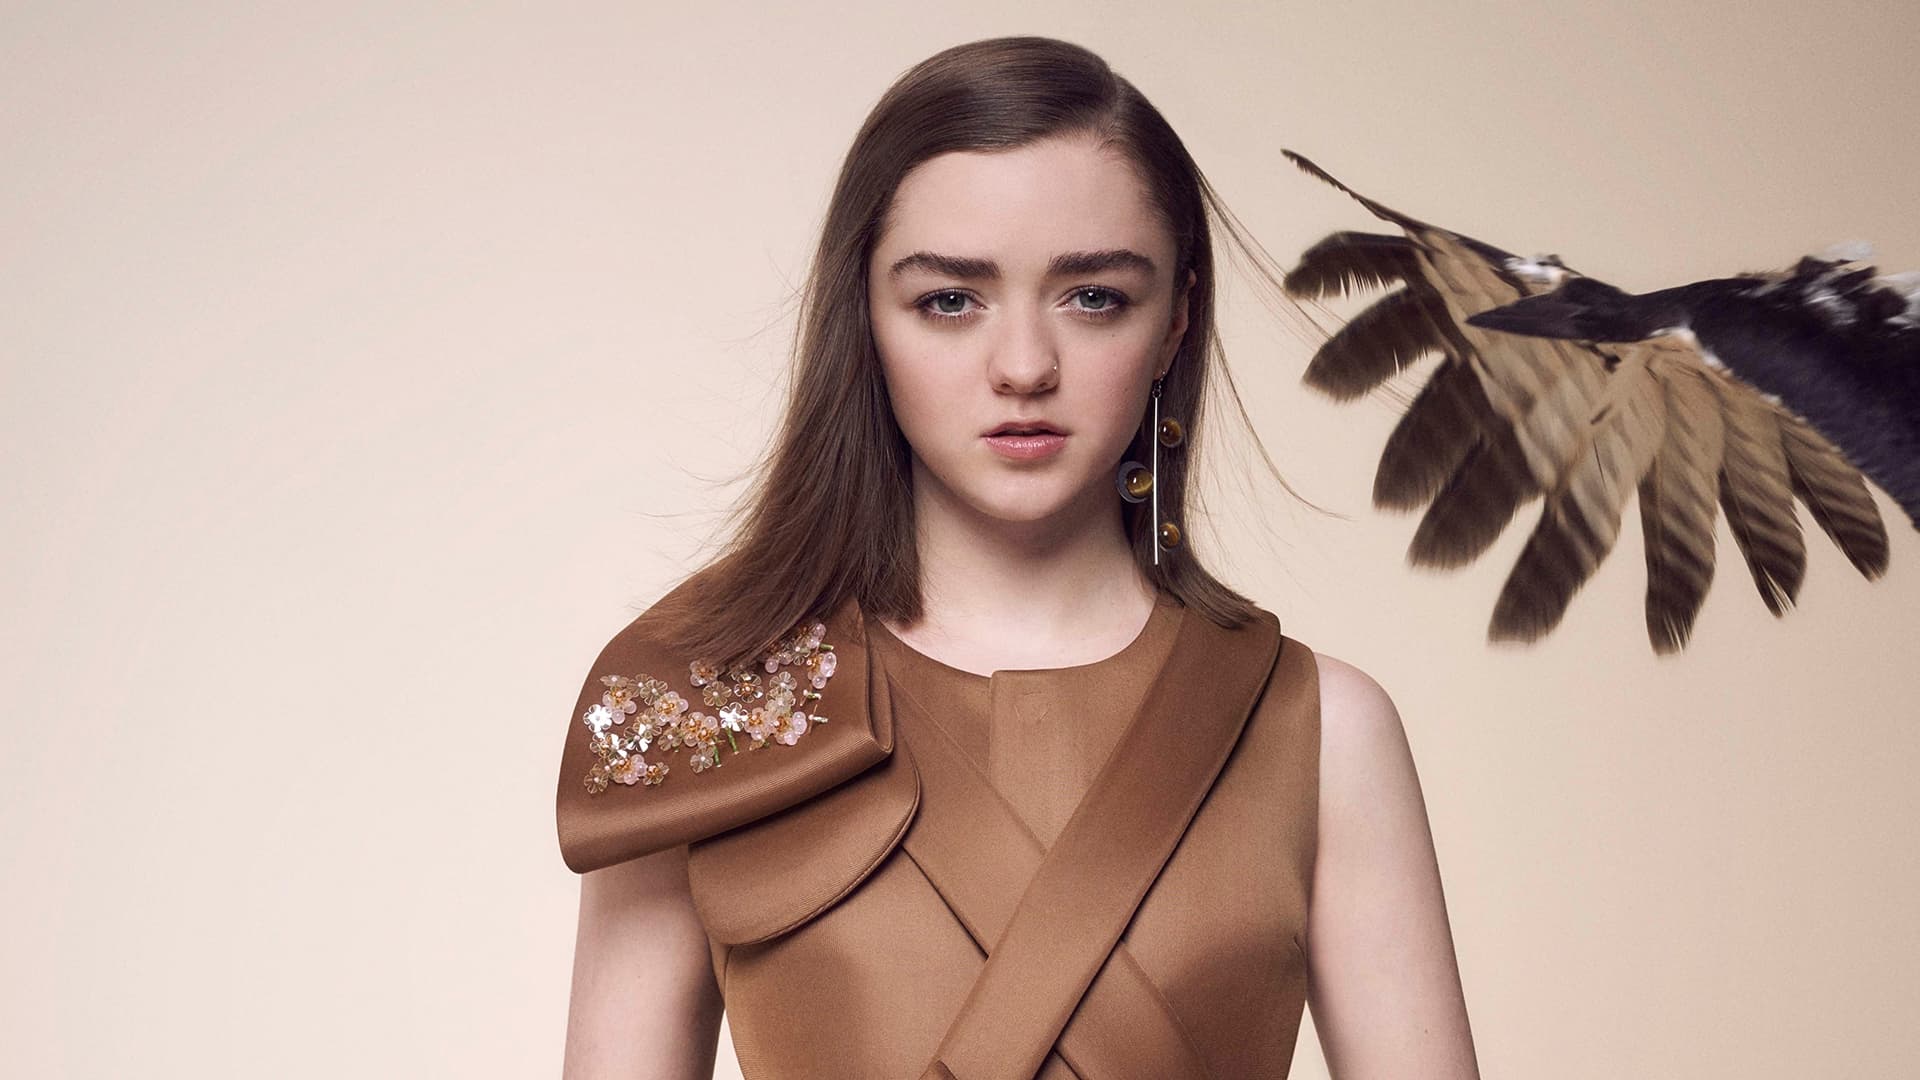 Maisie Williams wallpaper HD HIgh Quality Resolution Download